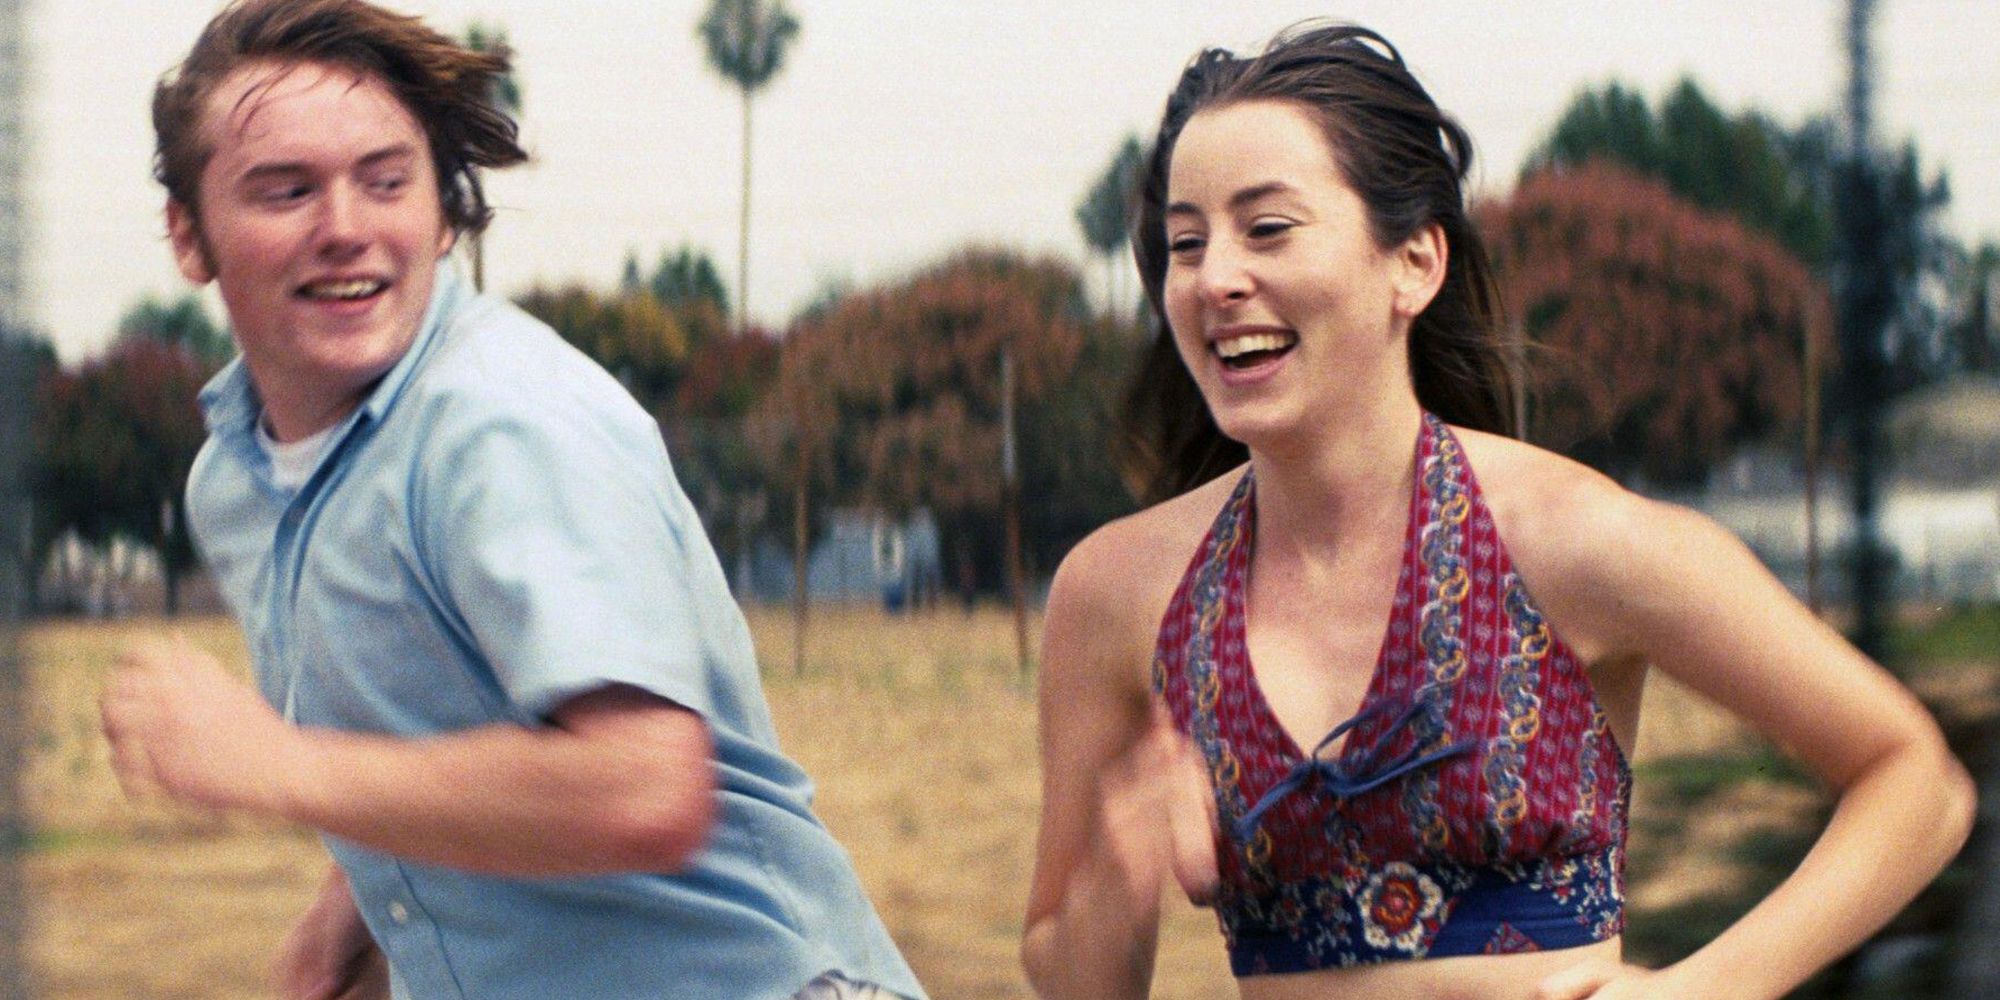 Alana Haim and Cooper Hoffman running alongside each other in Licorice Pizza